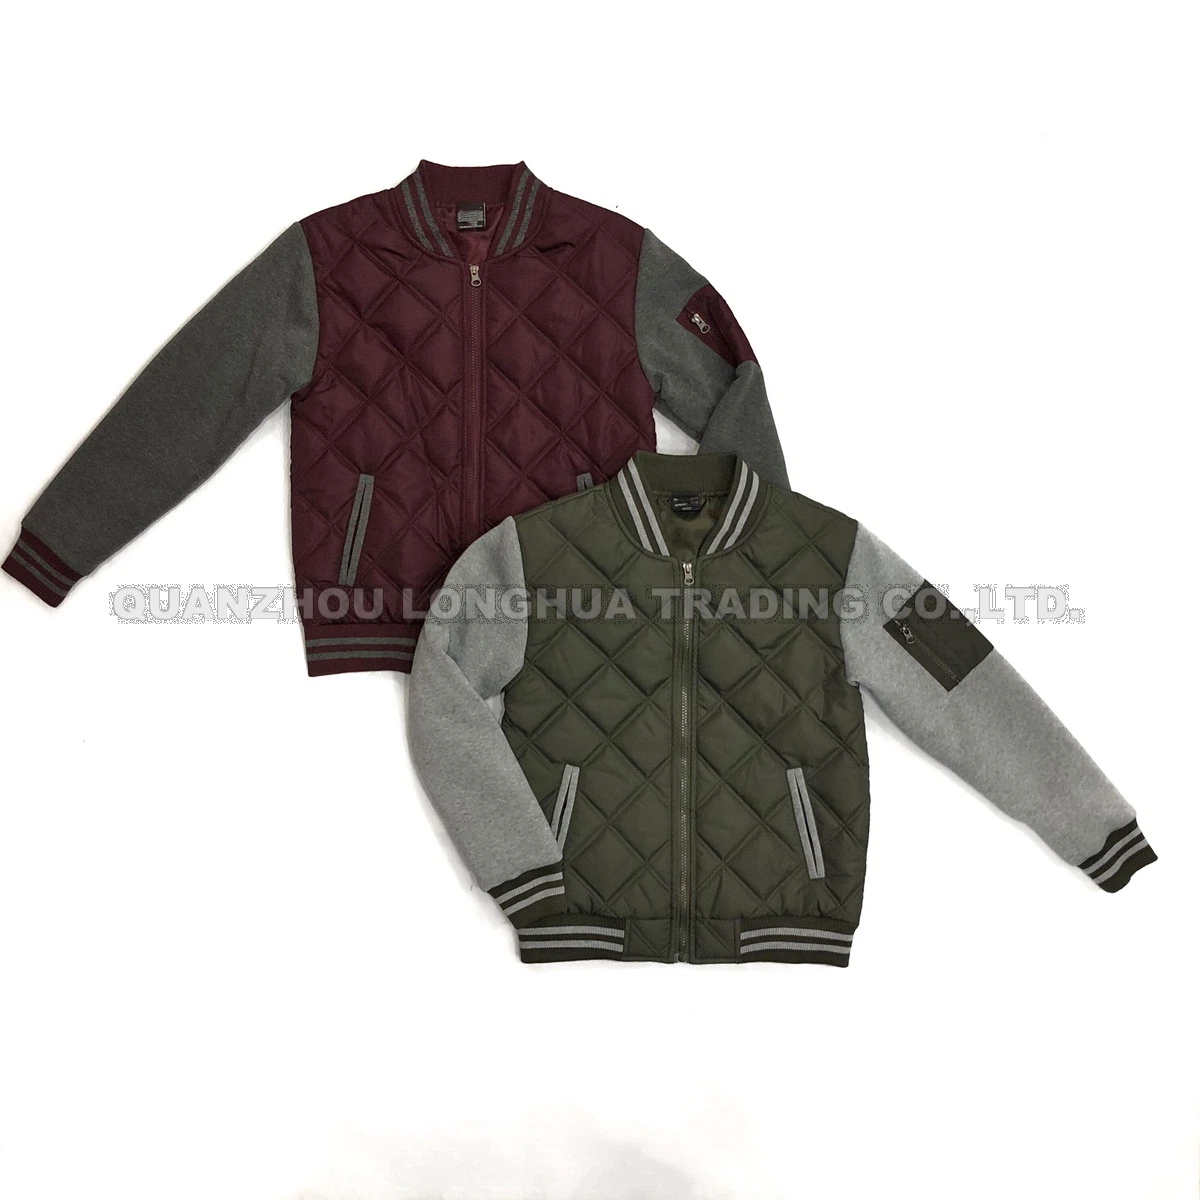 Men Jacket Boy New Style Apparel with Padding Winter Coat Fashion Clothes Outdoor Clothing